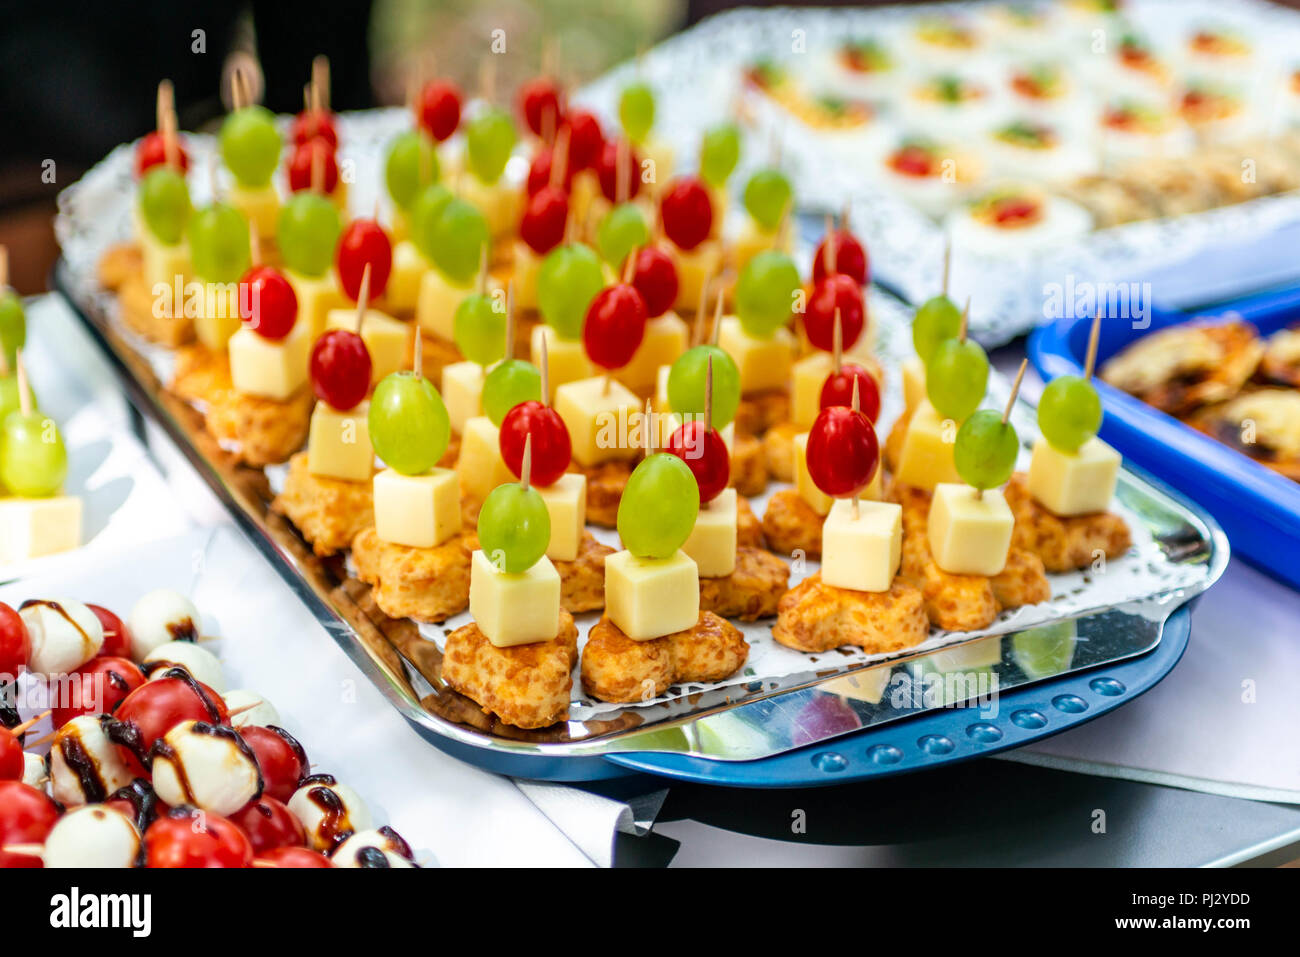 buffet Assortment of canapes. Banquet service. catering food, snacks with  mixed fingerfood appetizers Stock Photo - Alamy